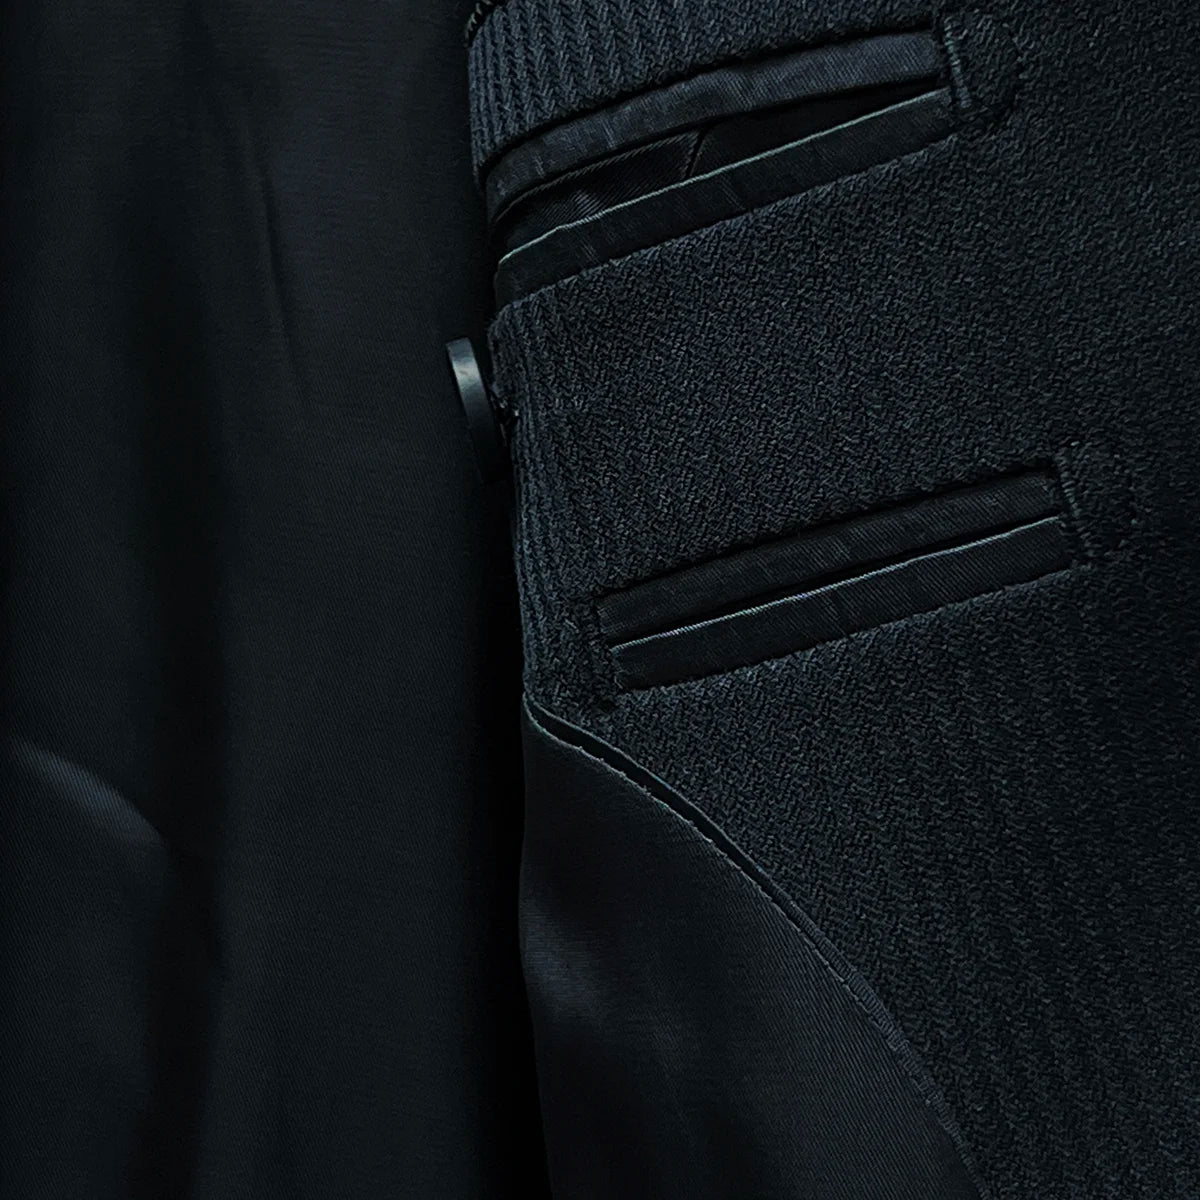 Detailed view of the black Bemberg lining inside the jacket, illustrating its quality and texture.